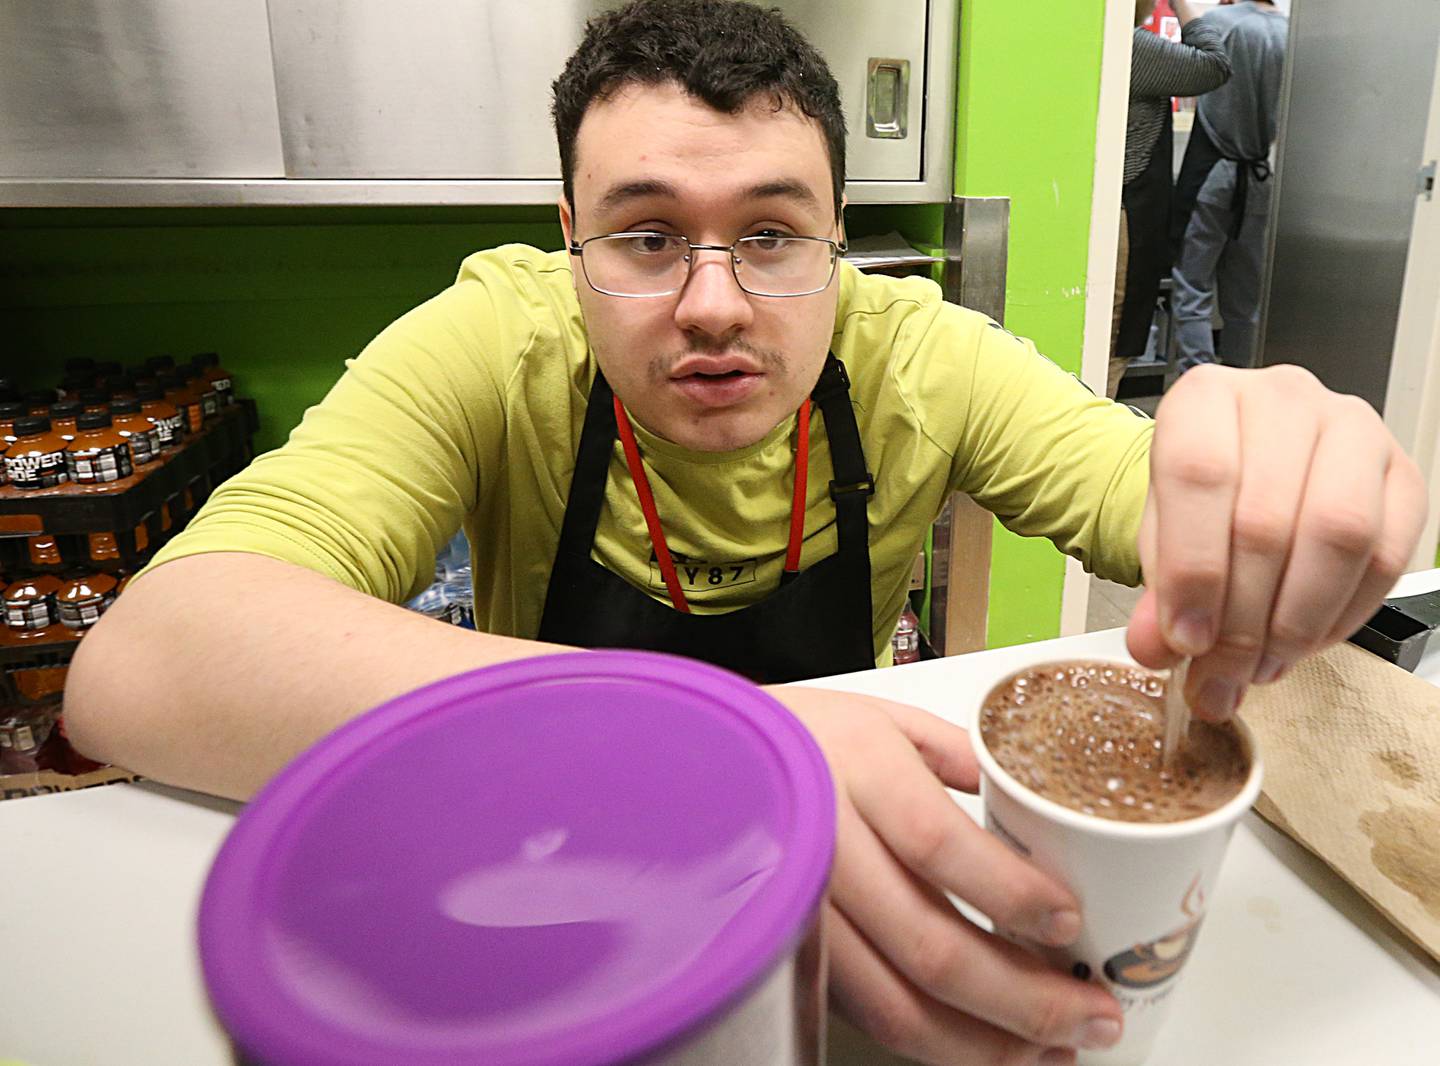 Eric Poole, student at La Salle-Peru Township High School, mixes up a cup of hot chocolate in the Cavs Sip-n-Savor cafe on Tuesday, Jan. 31, 2023 at L-P High School.